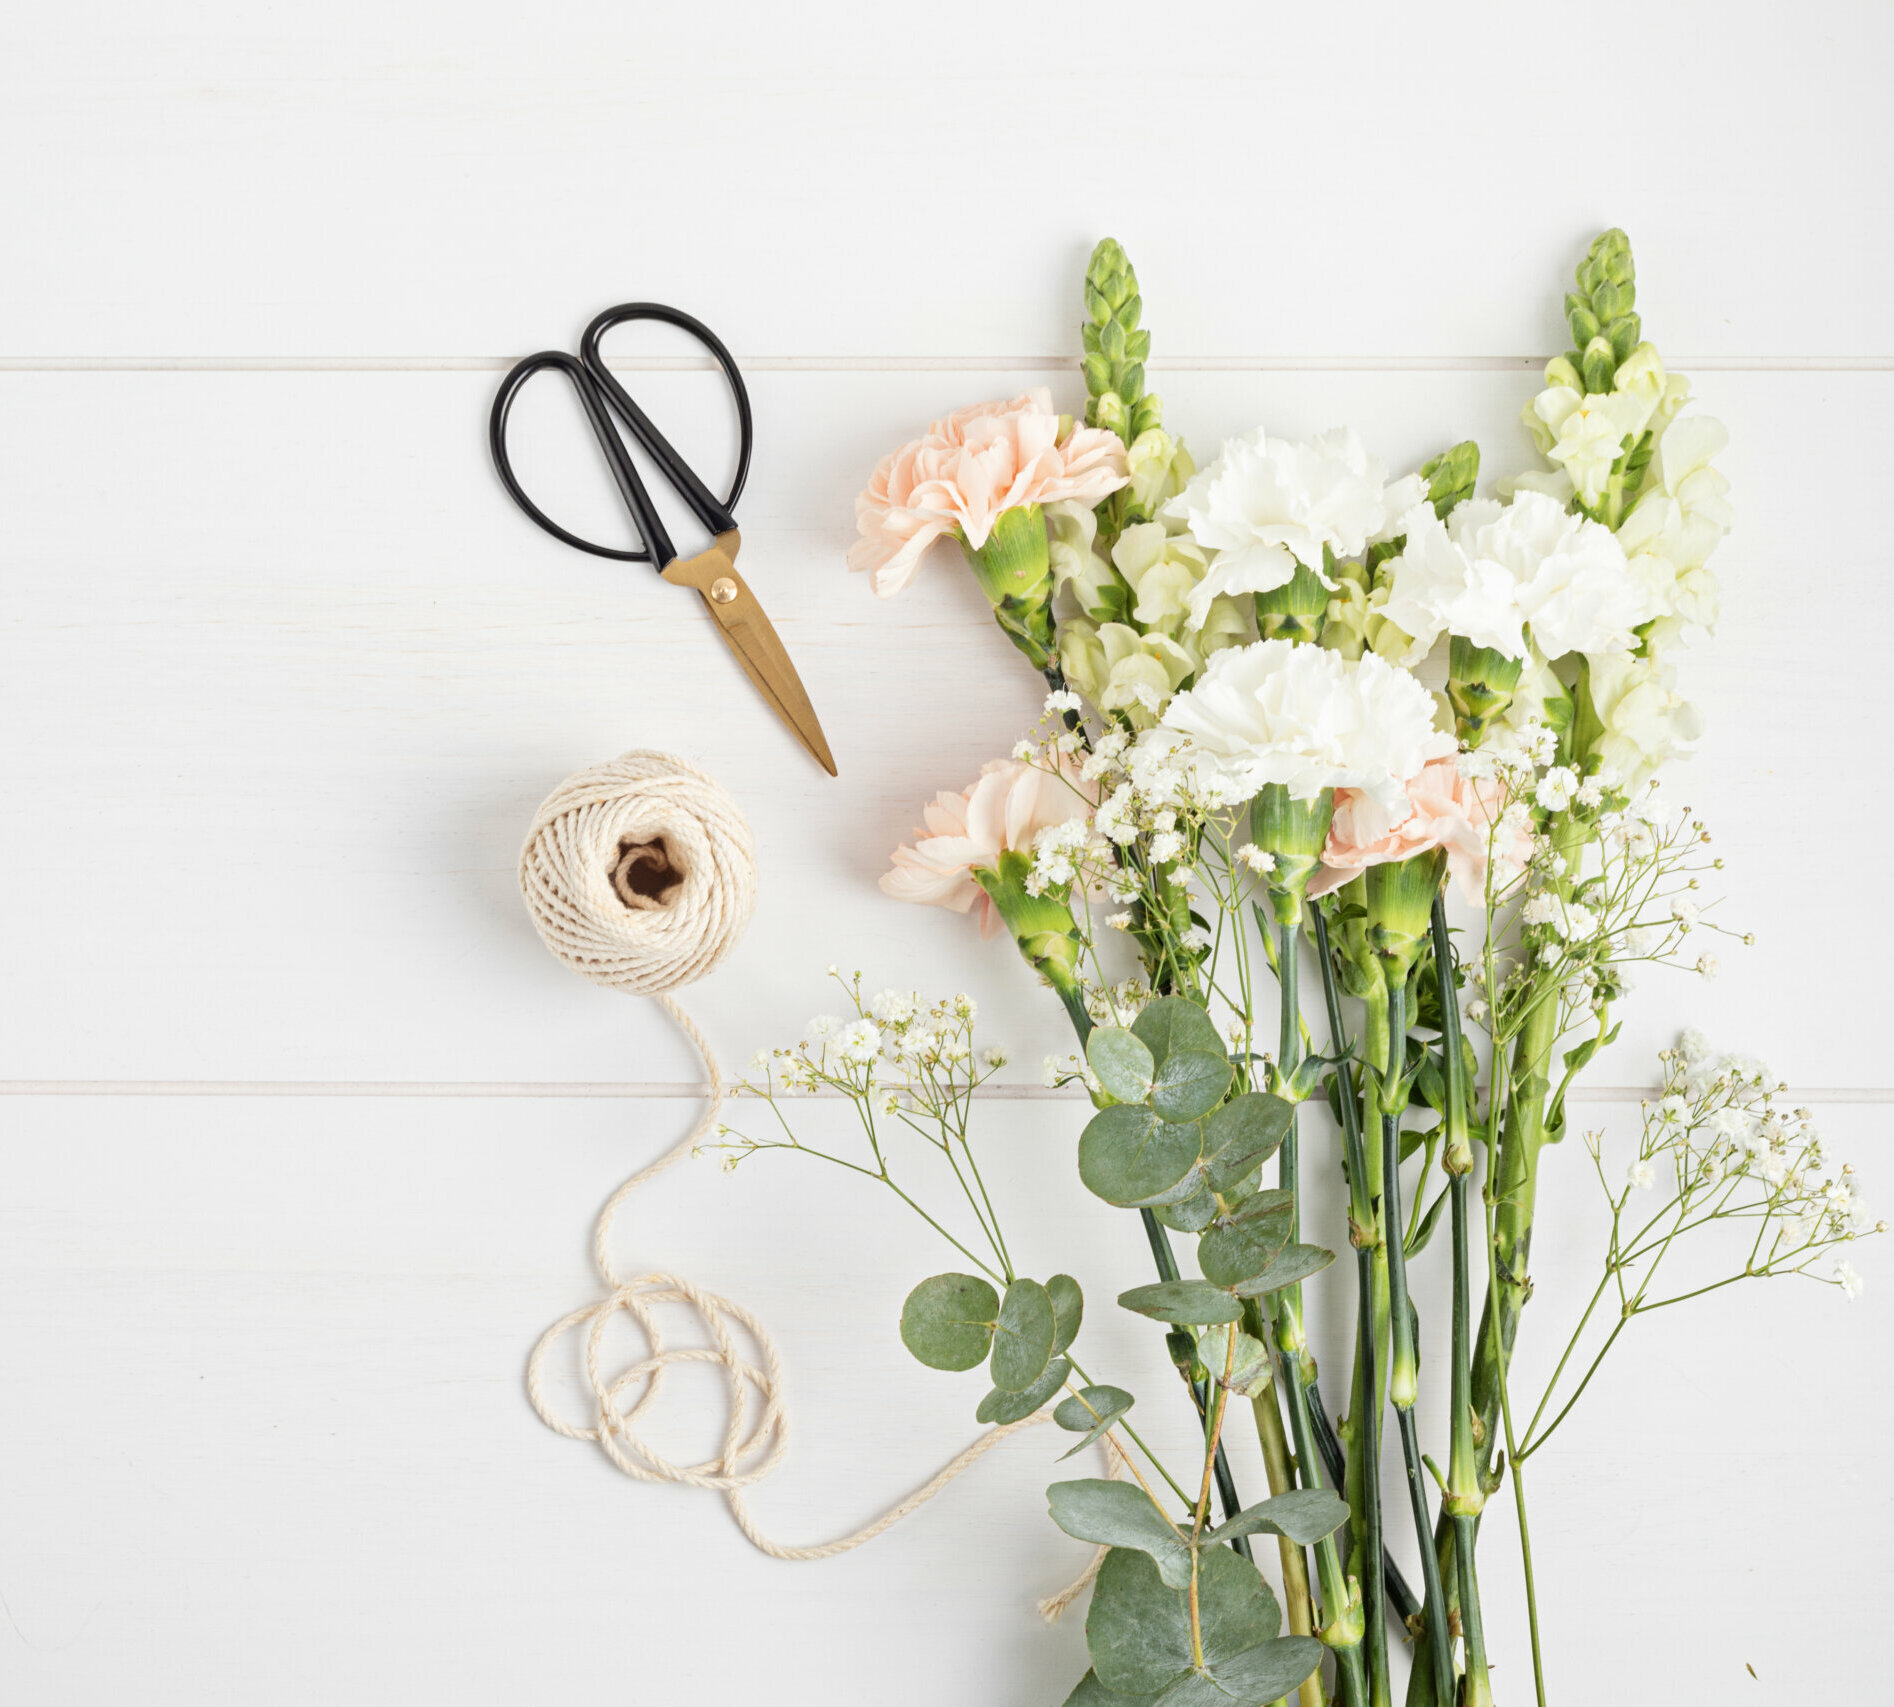 Variety of pink and white flowers next to small scissors and twine.